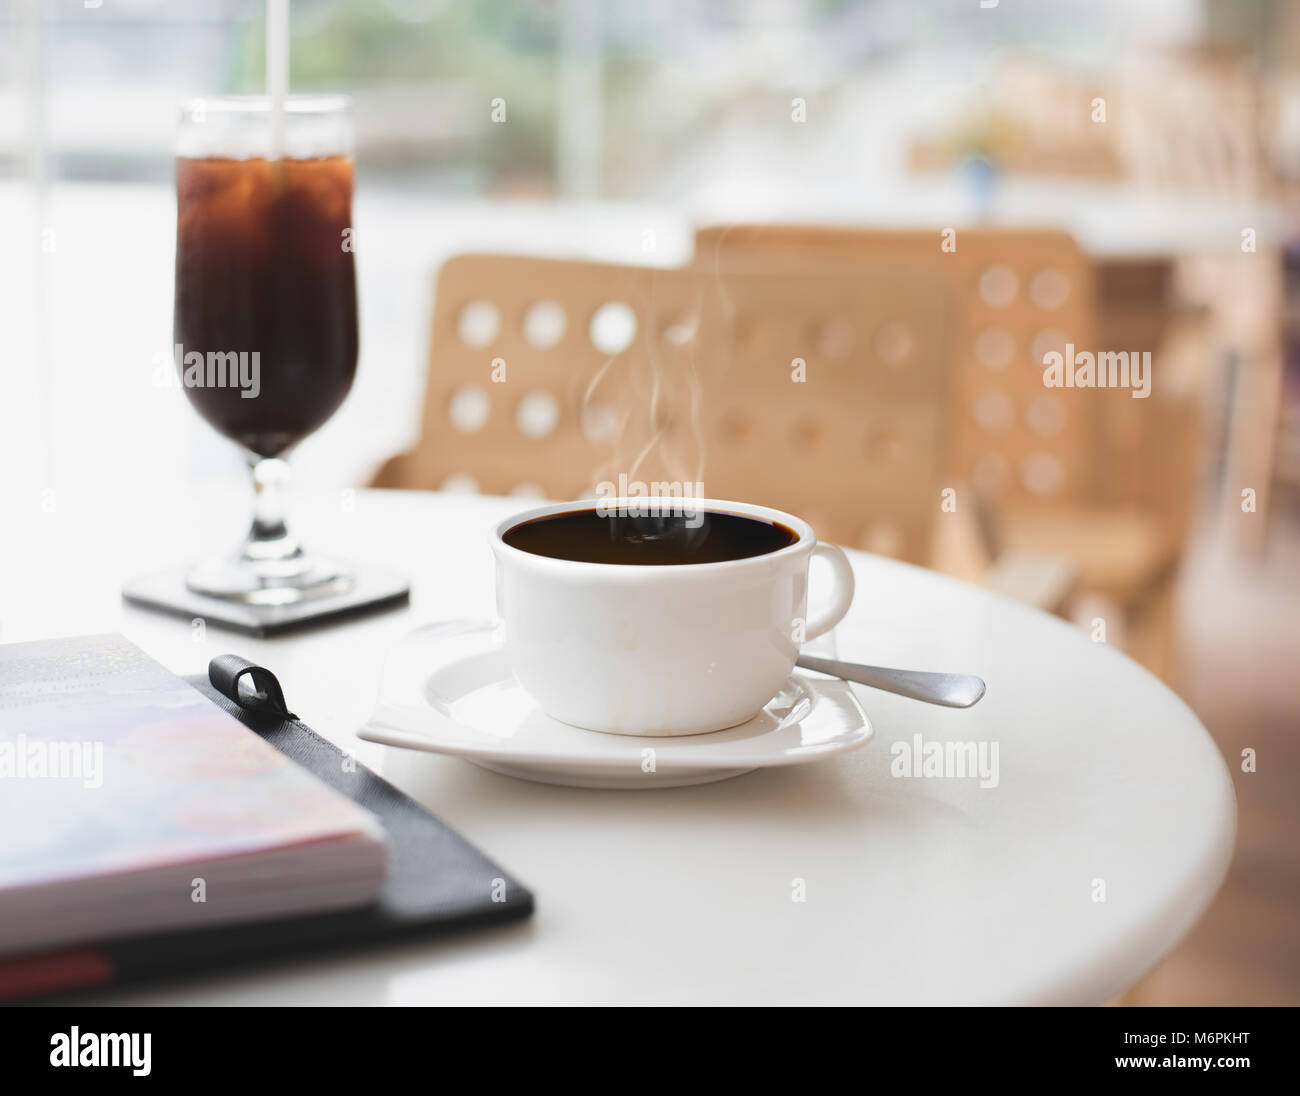 Hot black coffee mug on white table while still has a steam at empty cafe/restaurant. Concept of loneliness, isolation, abandonment or solitary. Stock Photo